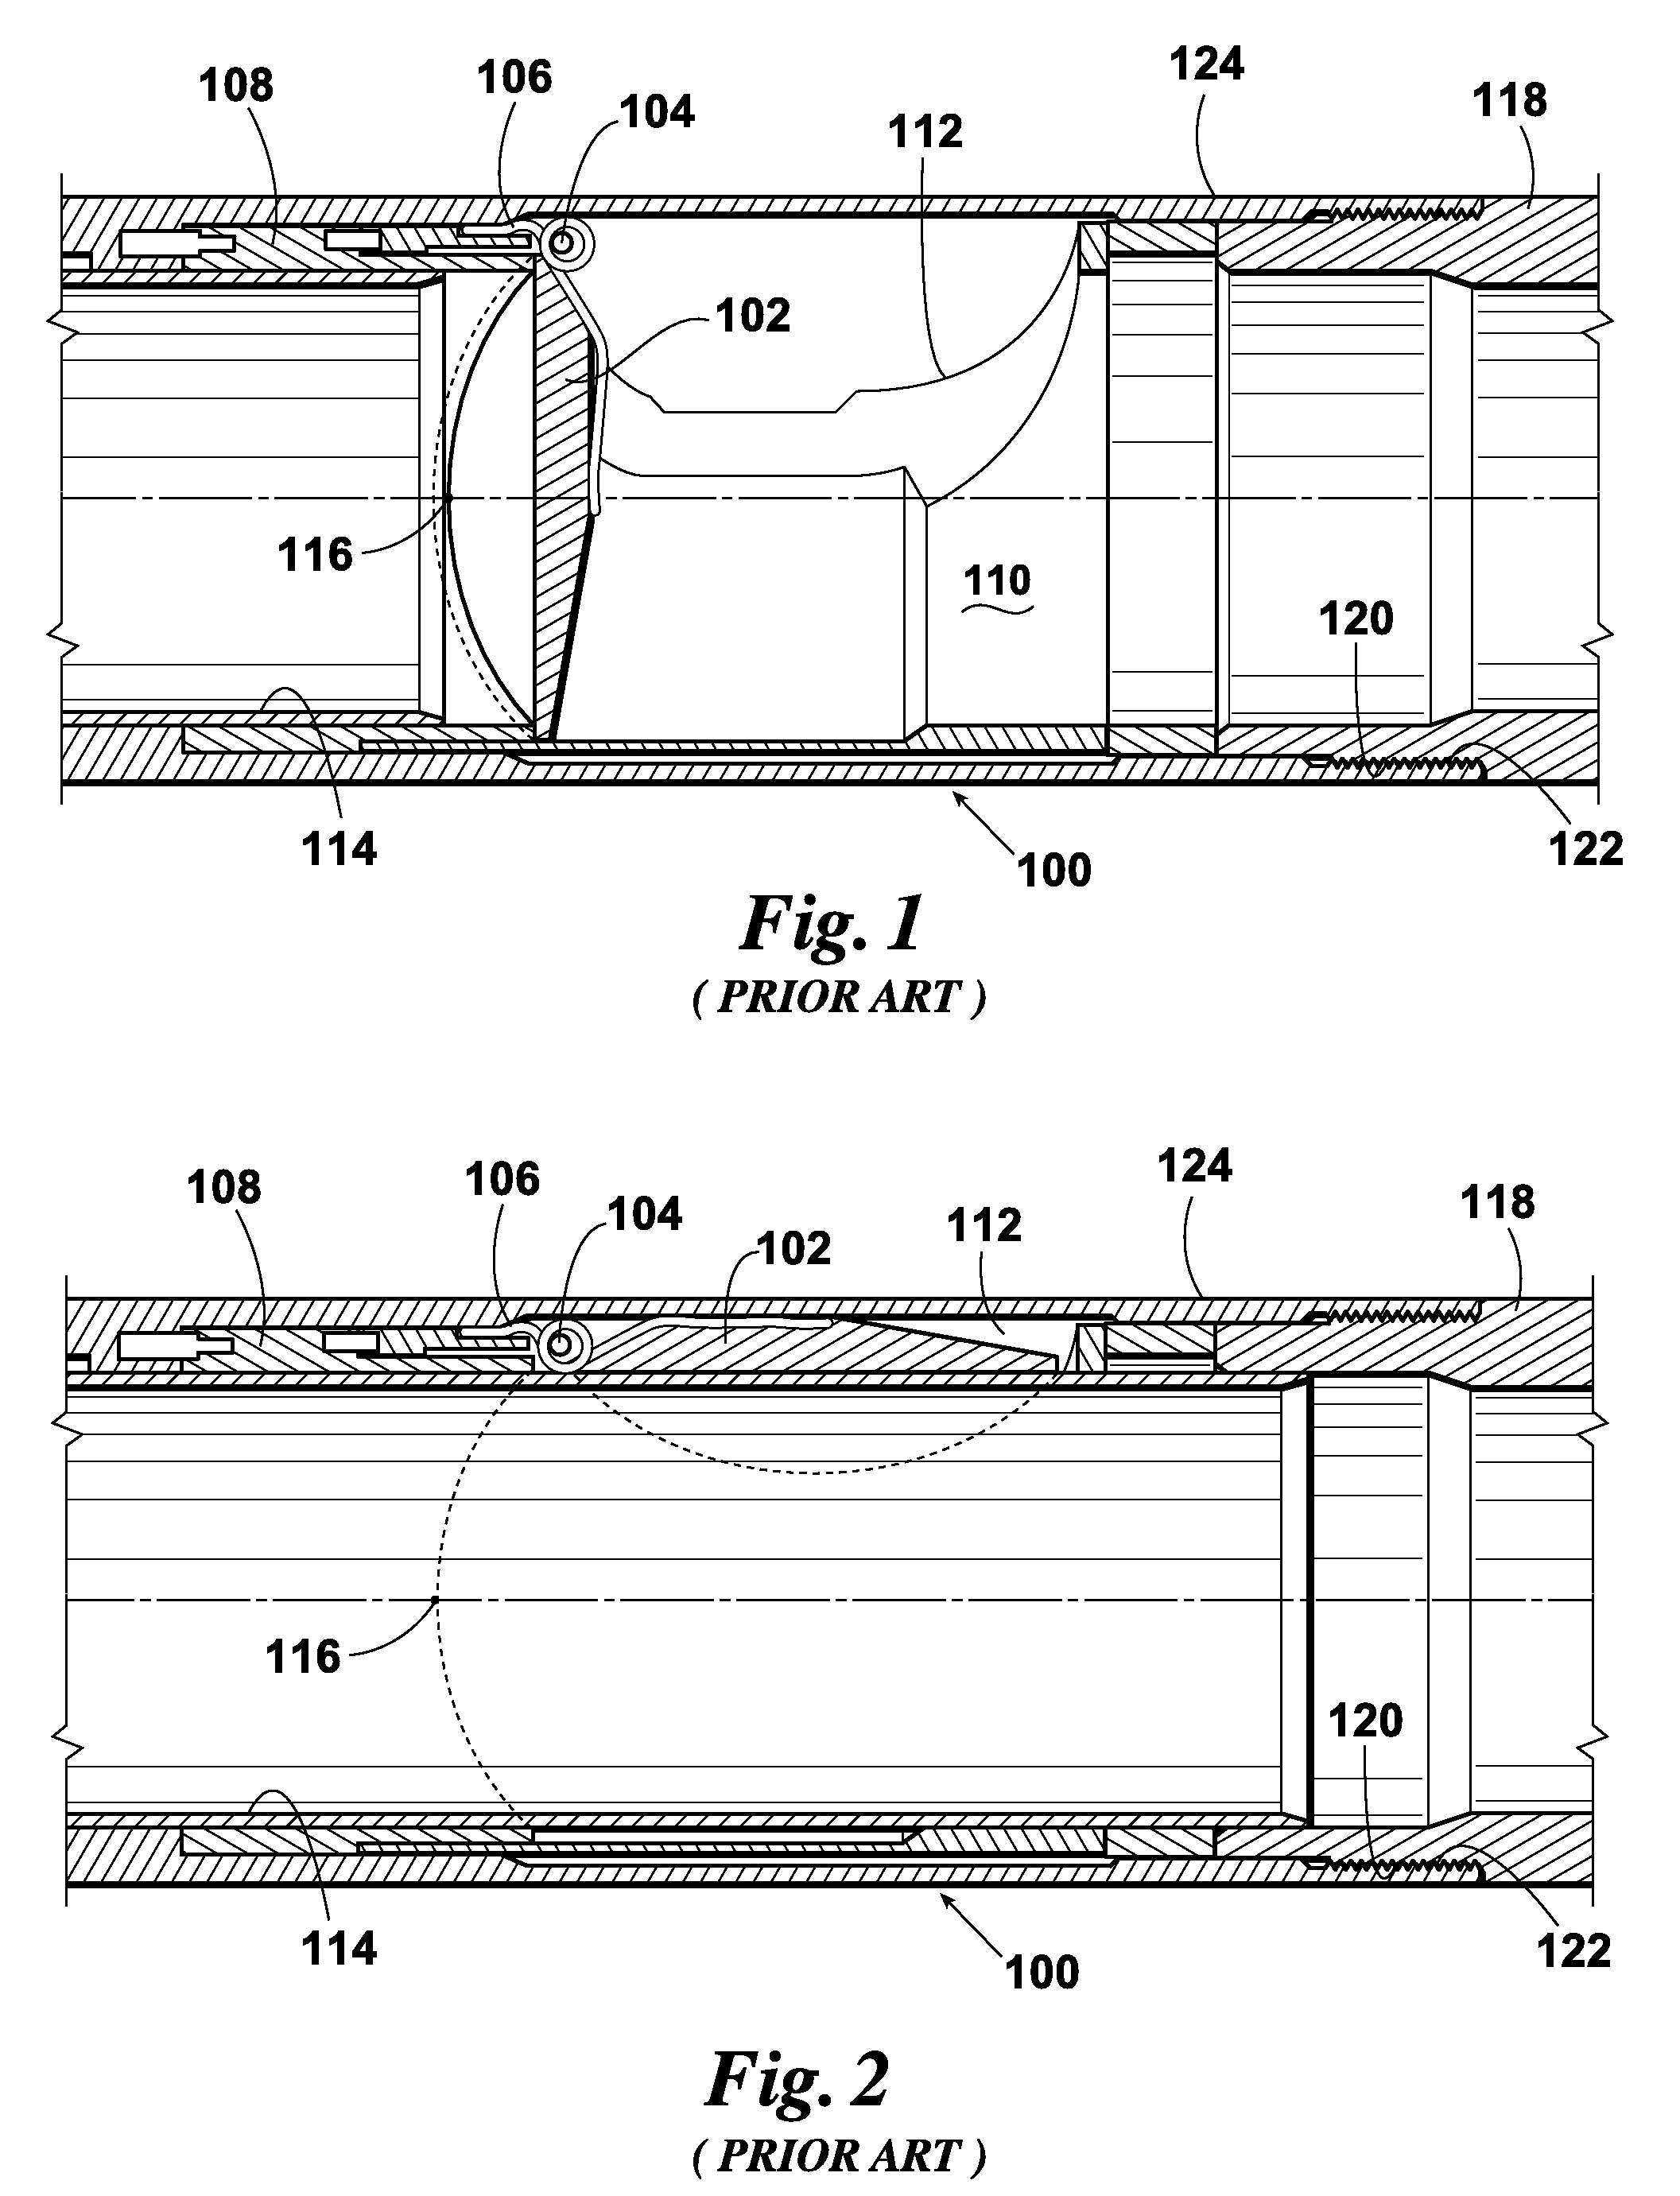 Flapper valve and actuator